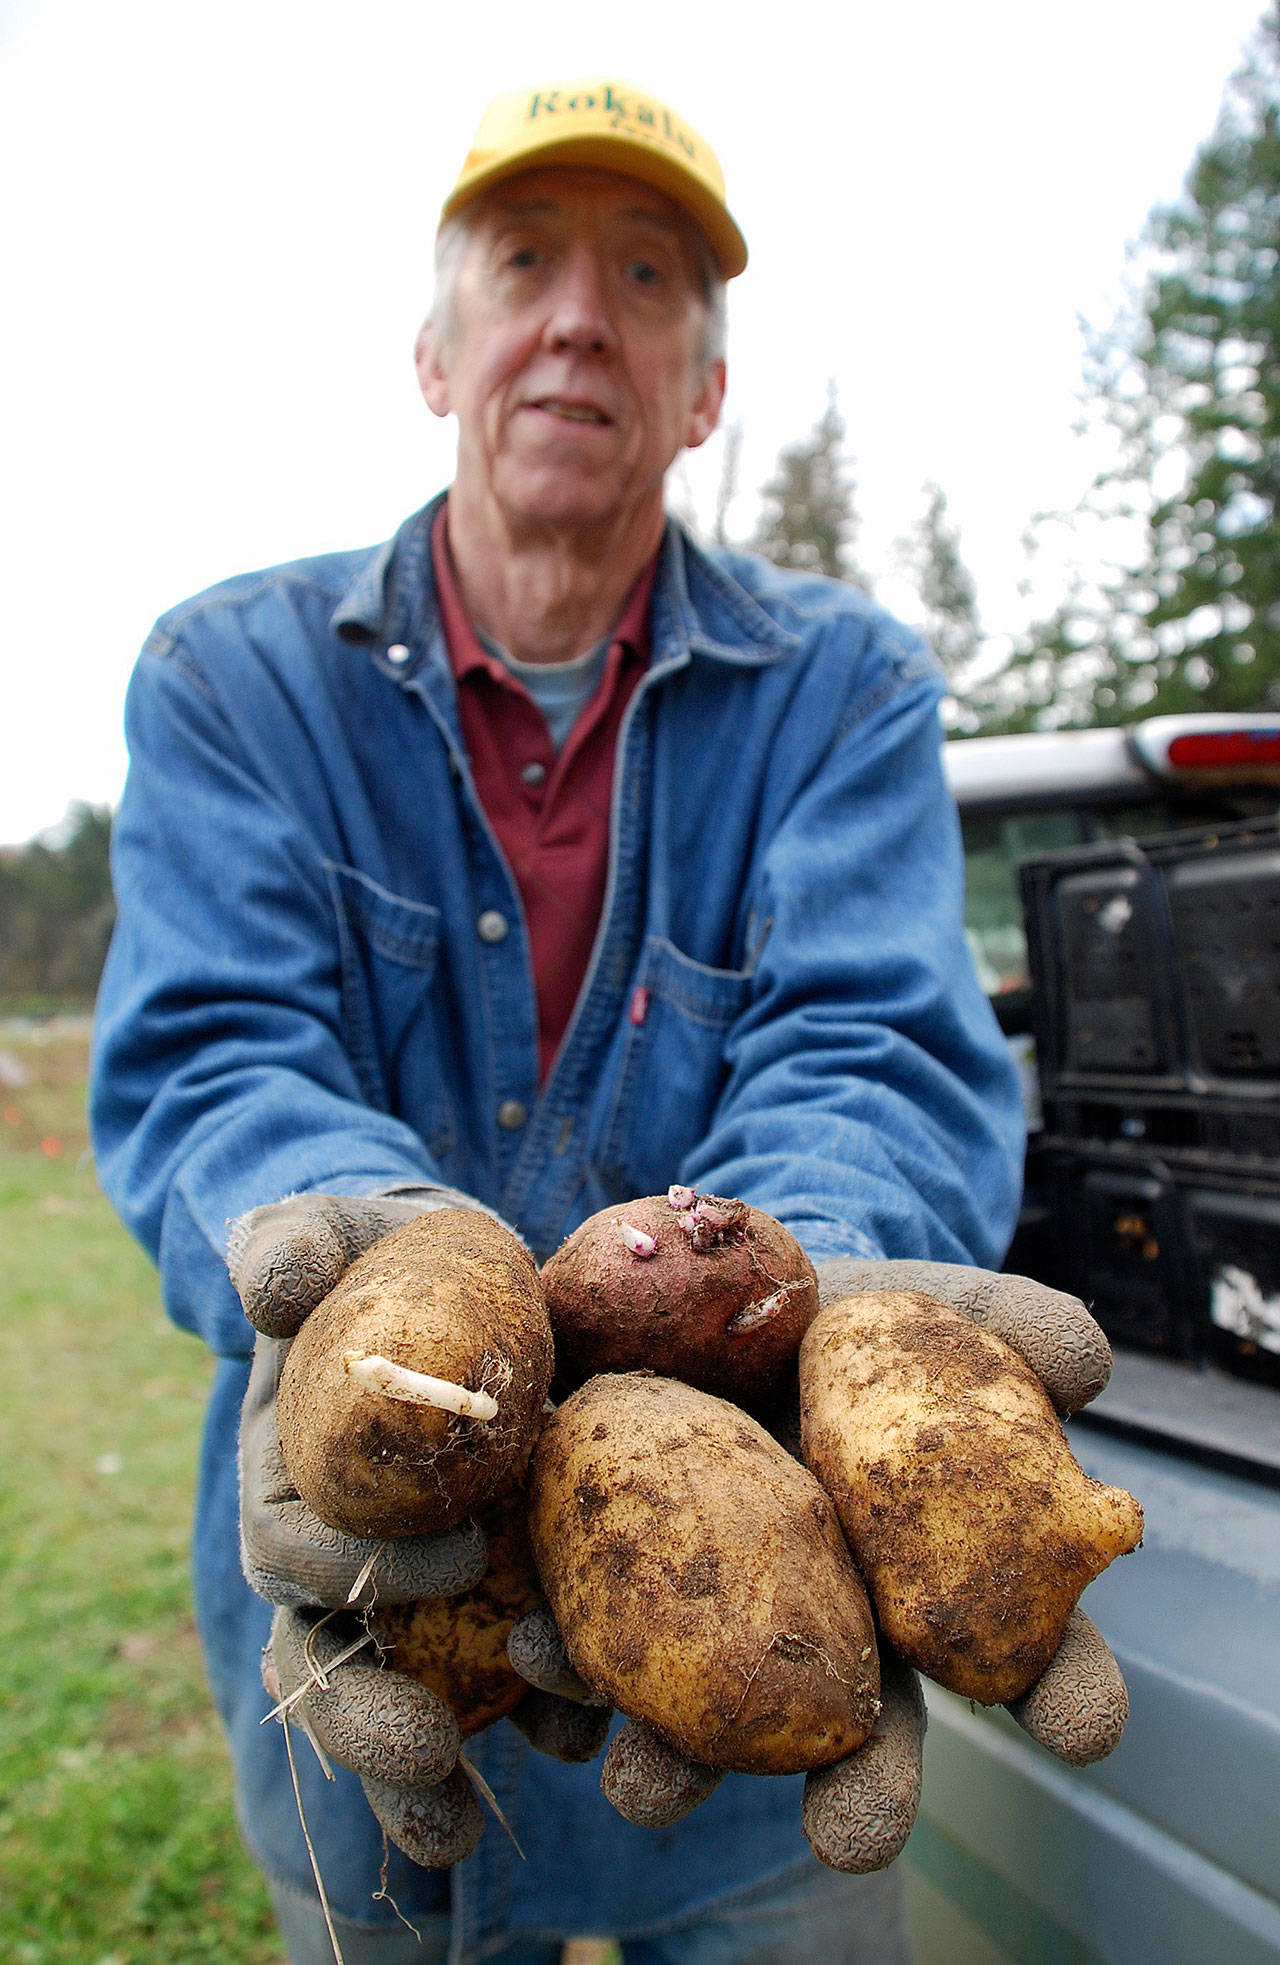 &lt;strong&gt;Spuds a-plenty (March 23, 2918)&lt;/strong&gt;                                South Kitsap couple Bob Gilby and Donna Branch-Gilby had just harvested vegetables from their Glenwood Road Southwest property, but they had a tenth-of-an-acre of potatoes still in the ground. In March, they invited community members under the coordination of the Kitsap Harvest gleaning coordinator, Paisley Gallagher, to glean the spuds for their own use — and for South Kitsap Helpline’s food bank. Plenty enough potatoes were harvested for hundreds of servings of mashed and scalloped potatoes, French fries, and presumably lots of au gratin casseroles and potato salad.